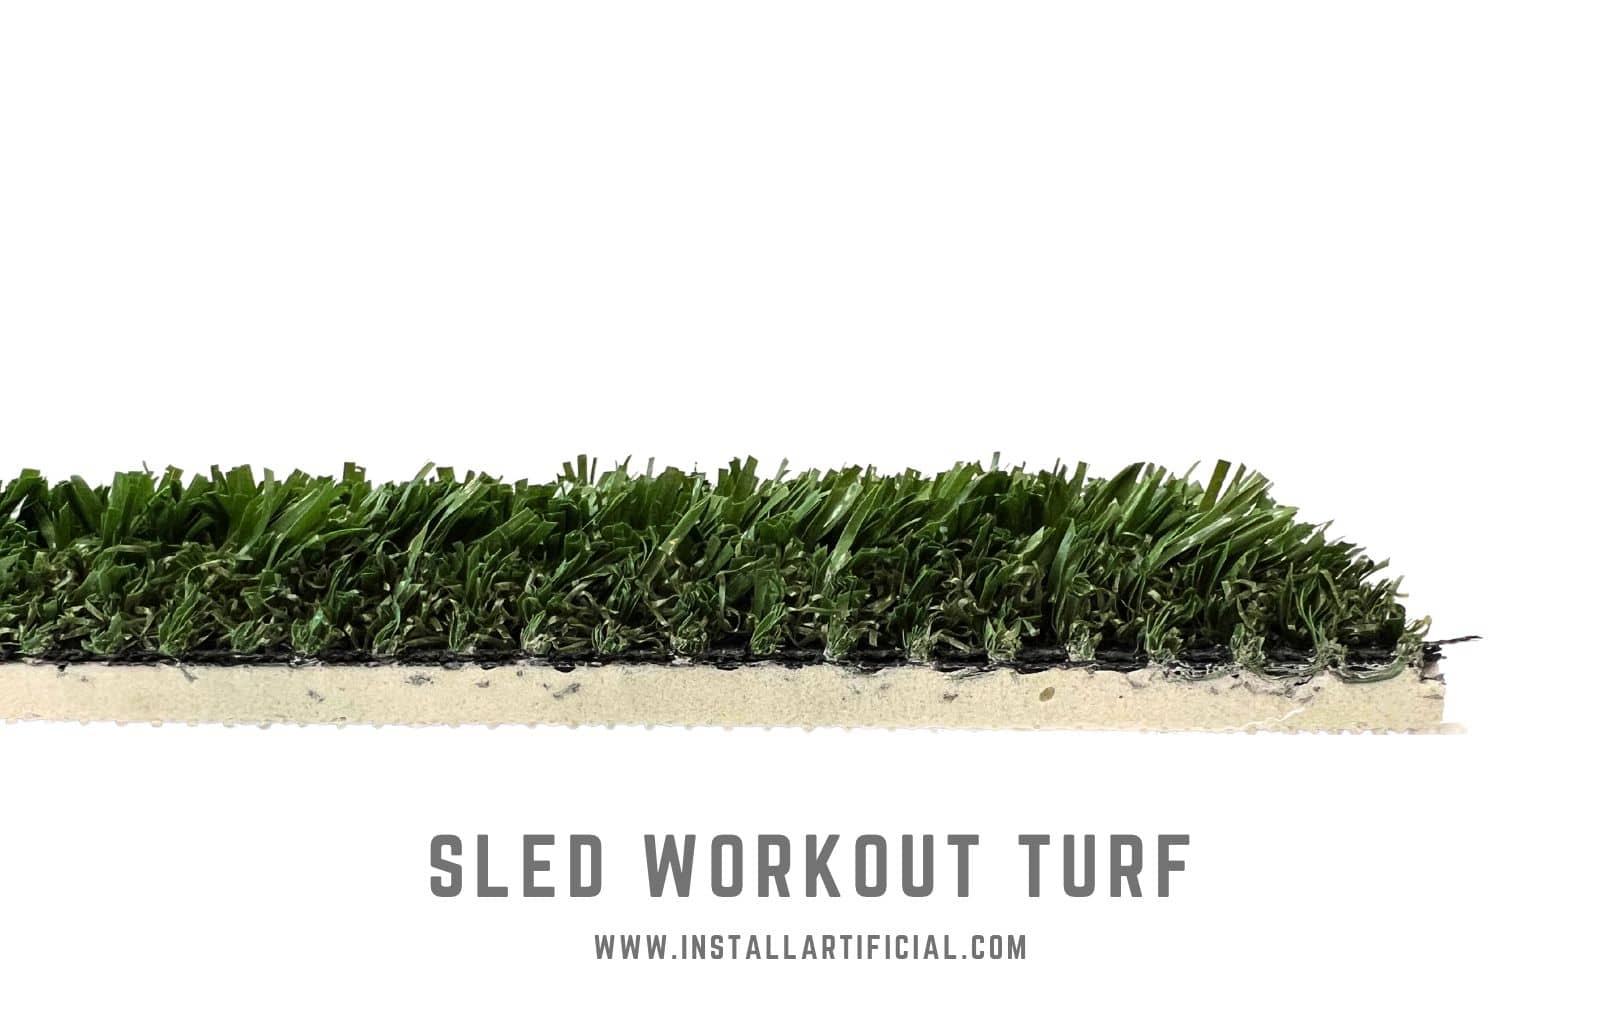 Sled Workout Turf